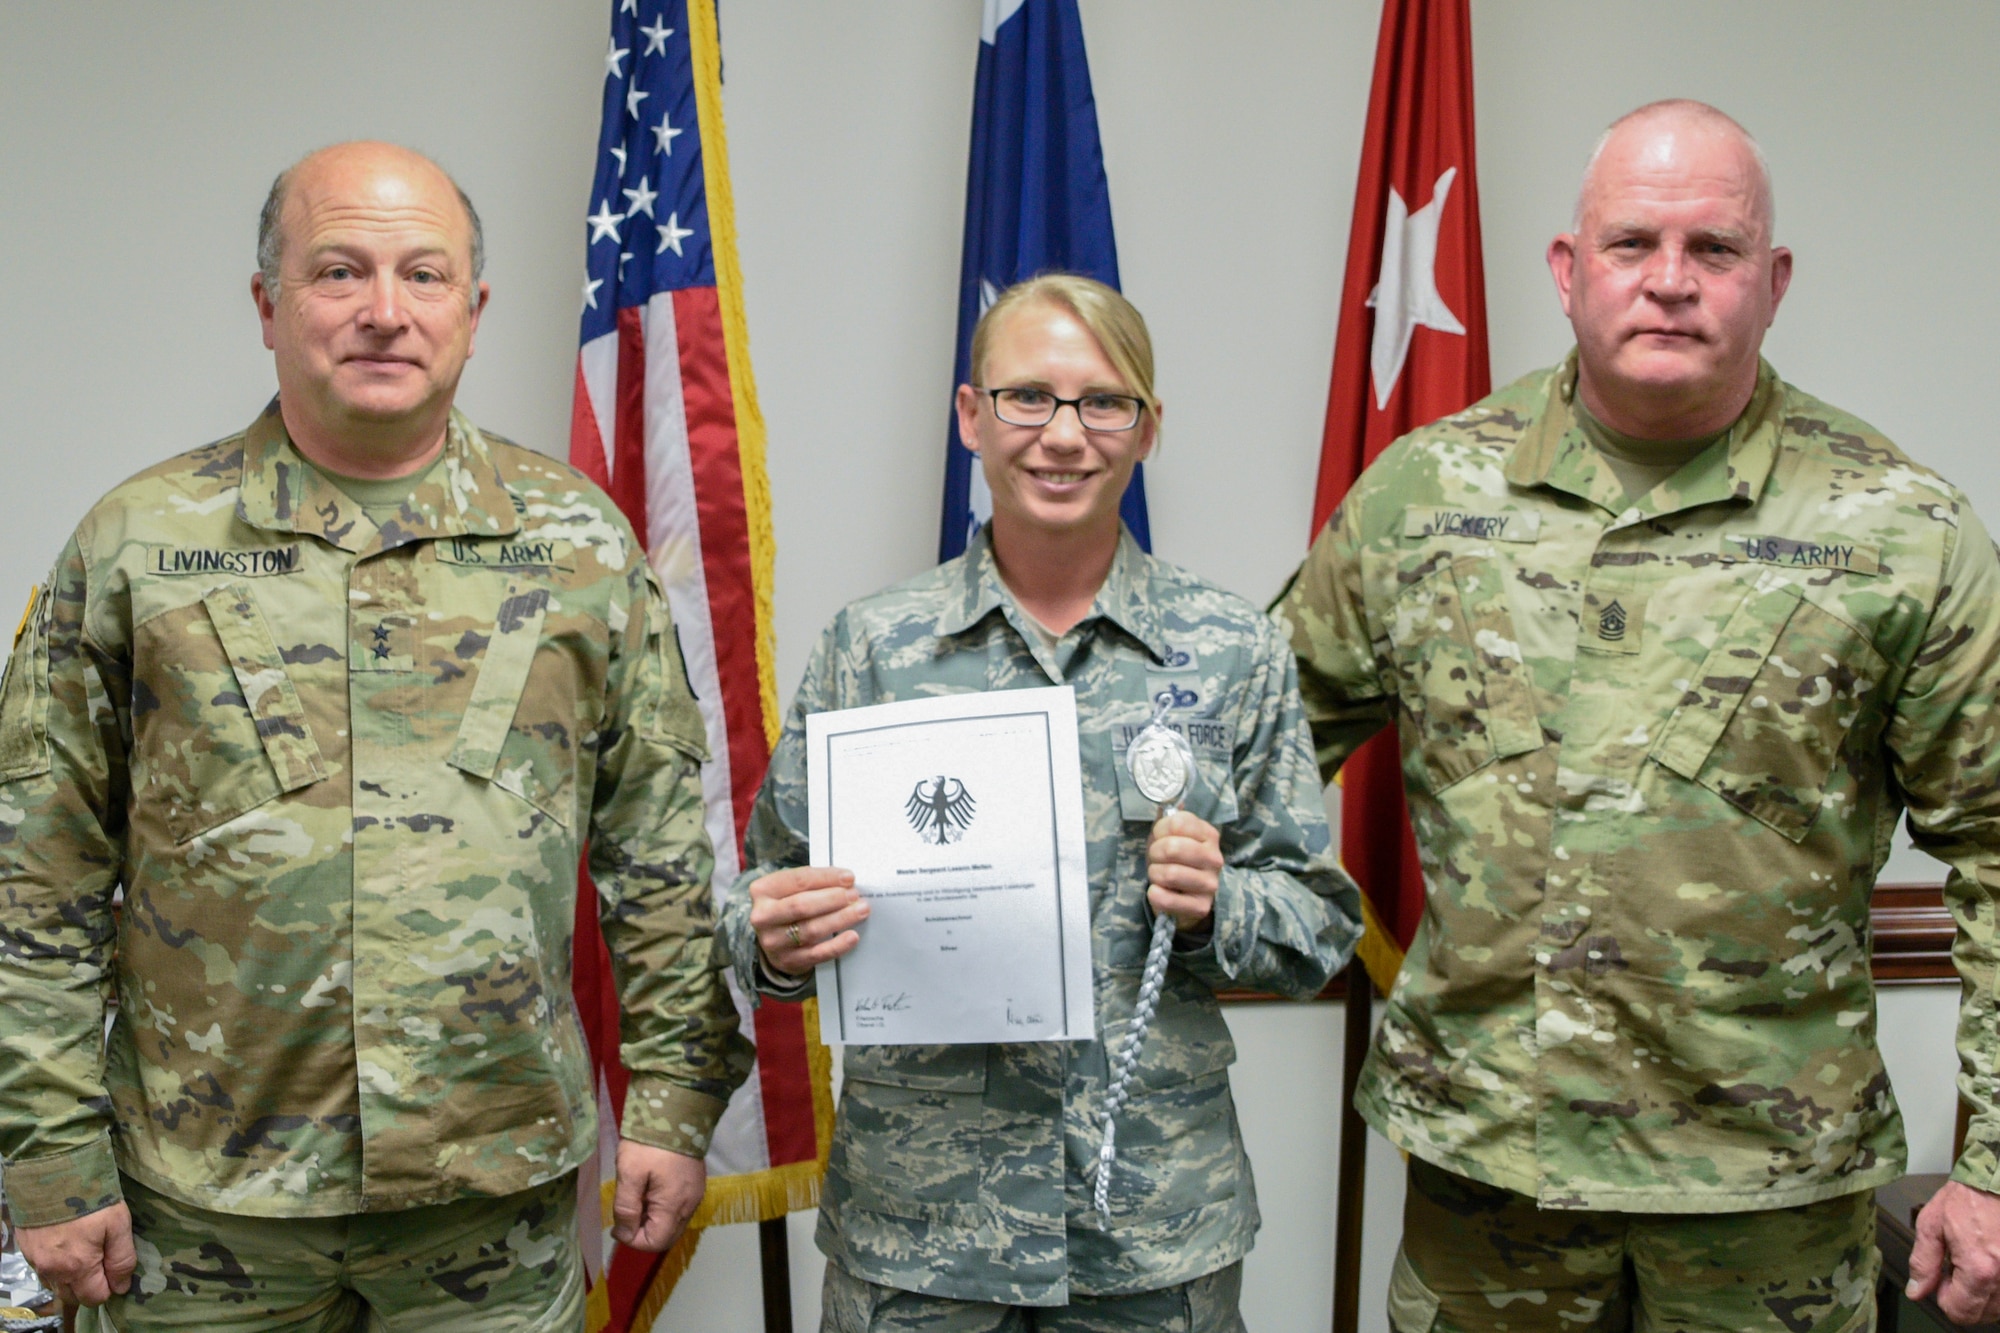 U.S.Army Maj. Gen. Robert E. Livingston Jr., adjutant general for South Carolina and State Command Sgt. Maj. Russel A. Vickery present the Schutzenschnur Badge to Master Sgt. Leeann Melton, a paralegal assigned to the South Carolina Air National Guard's 169th Fighter Wing, for demonstrating profeciency in firing German weapons at a ceremony March 7, 2018 at the Adjutant Generals' building in Columbia S.C. Melton and several other service members were chosen to participate in a specialized training opportunity to work with German soldiers. They learned how to fire a German rifle, pistol and machine gun. (U.S. Army National Guard photo by 1st Lt. Tracci Dorgan)